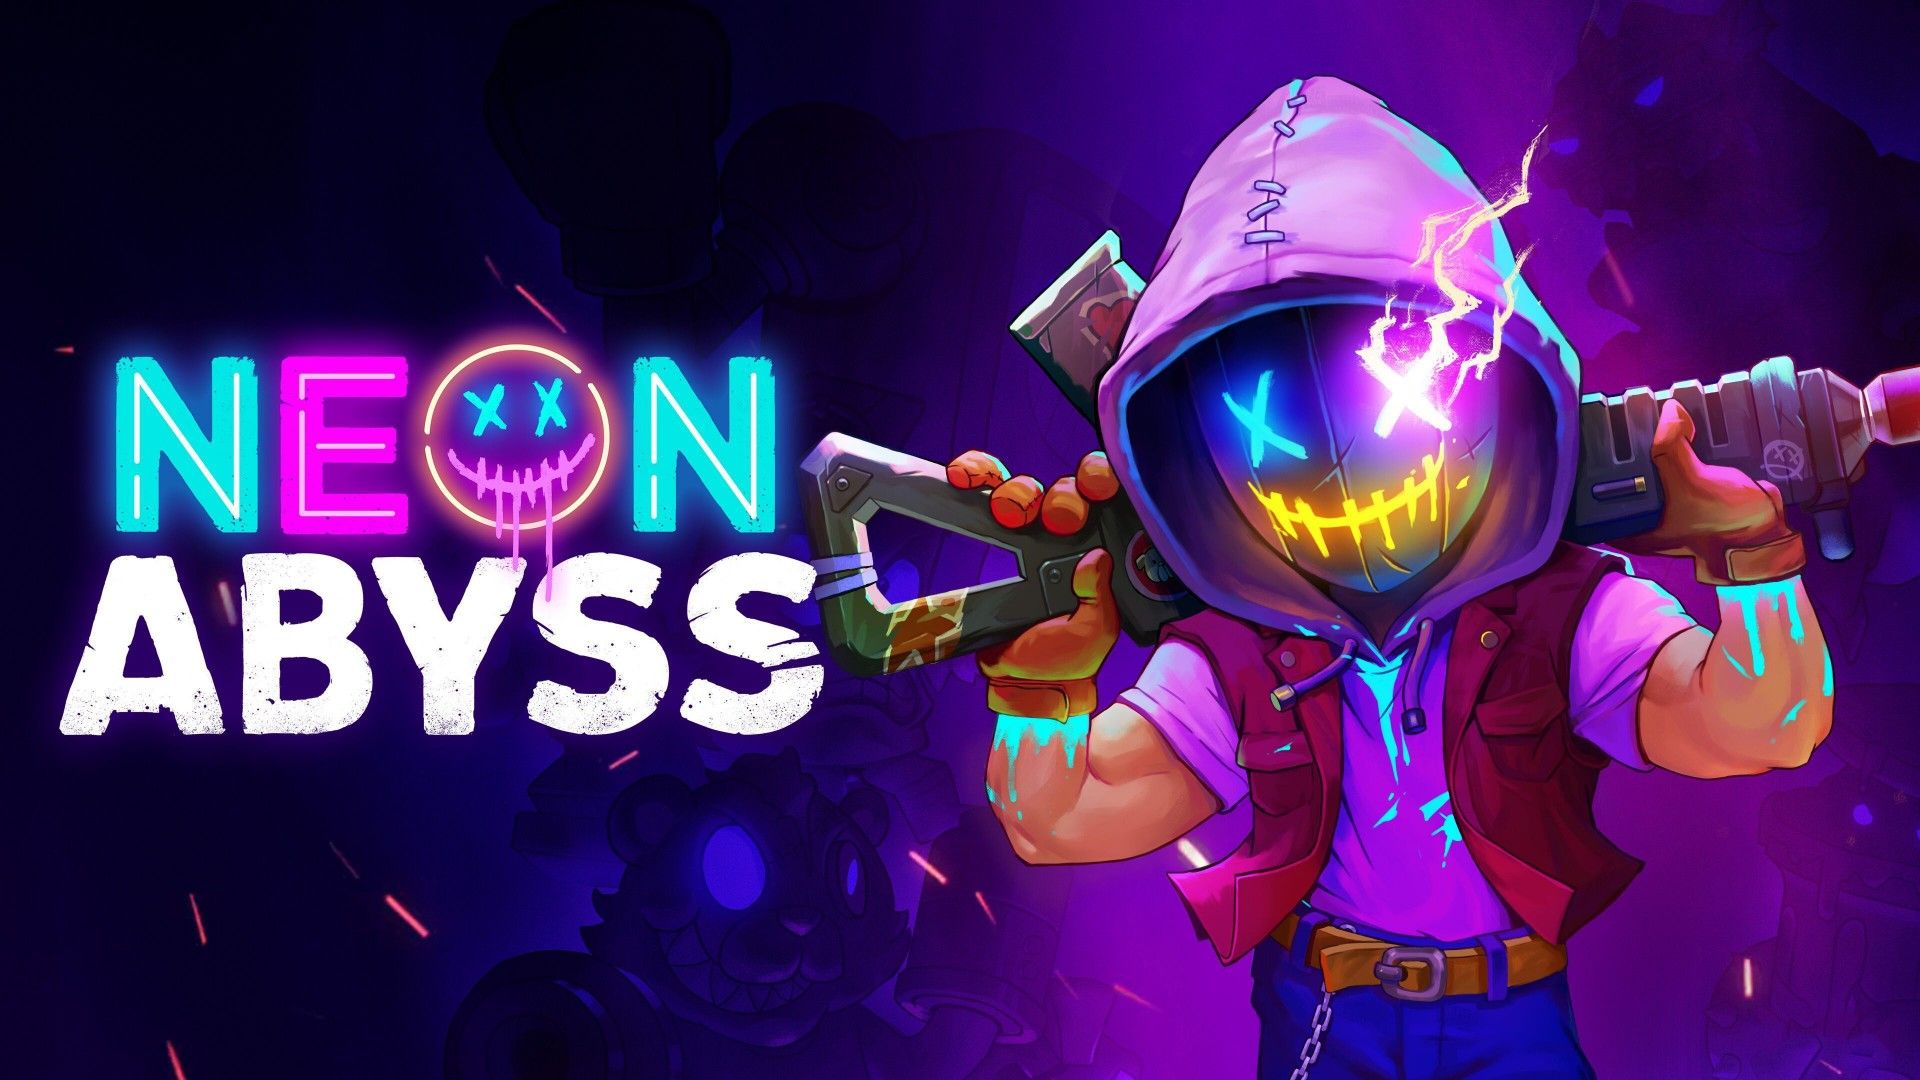 Neon Abyss 4K Wallpaper, PlayStation 4, Xbox One, Nintendo Switch, PC Games, 2020 Games, Games,